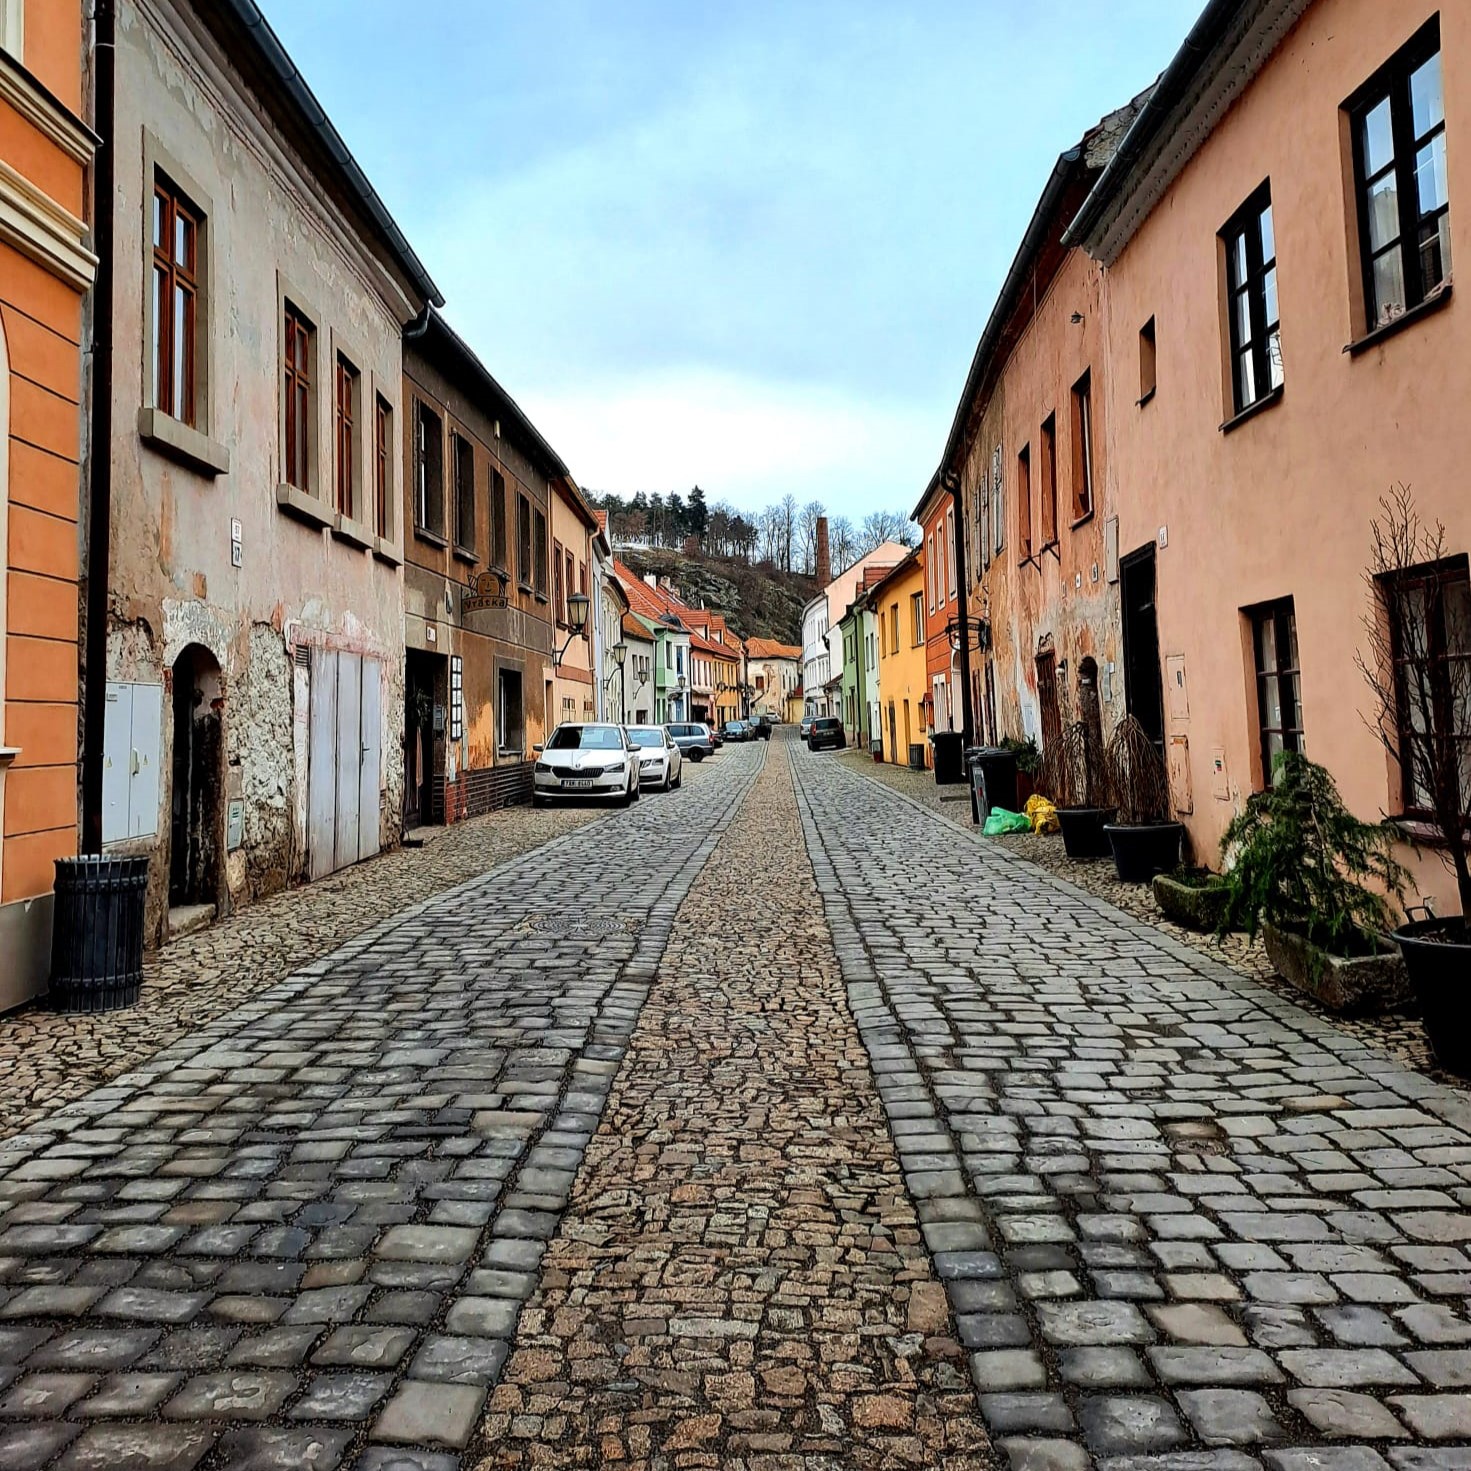 A street in the Jewish quarter of the city